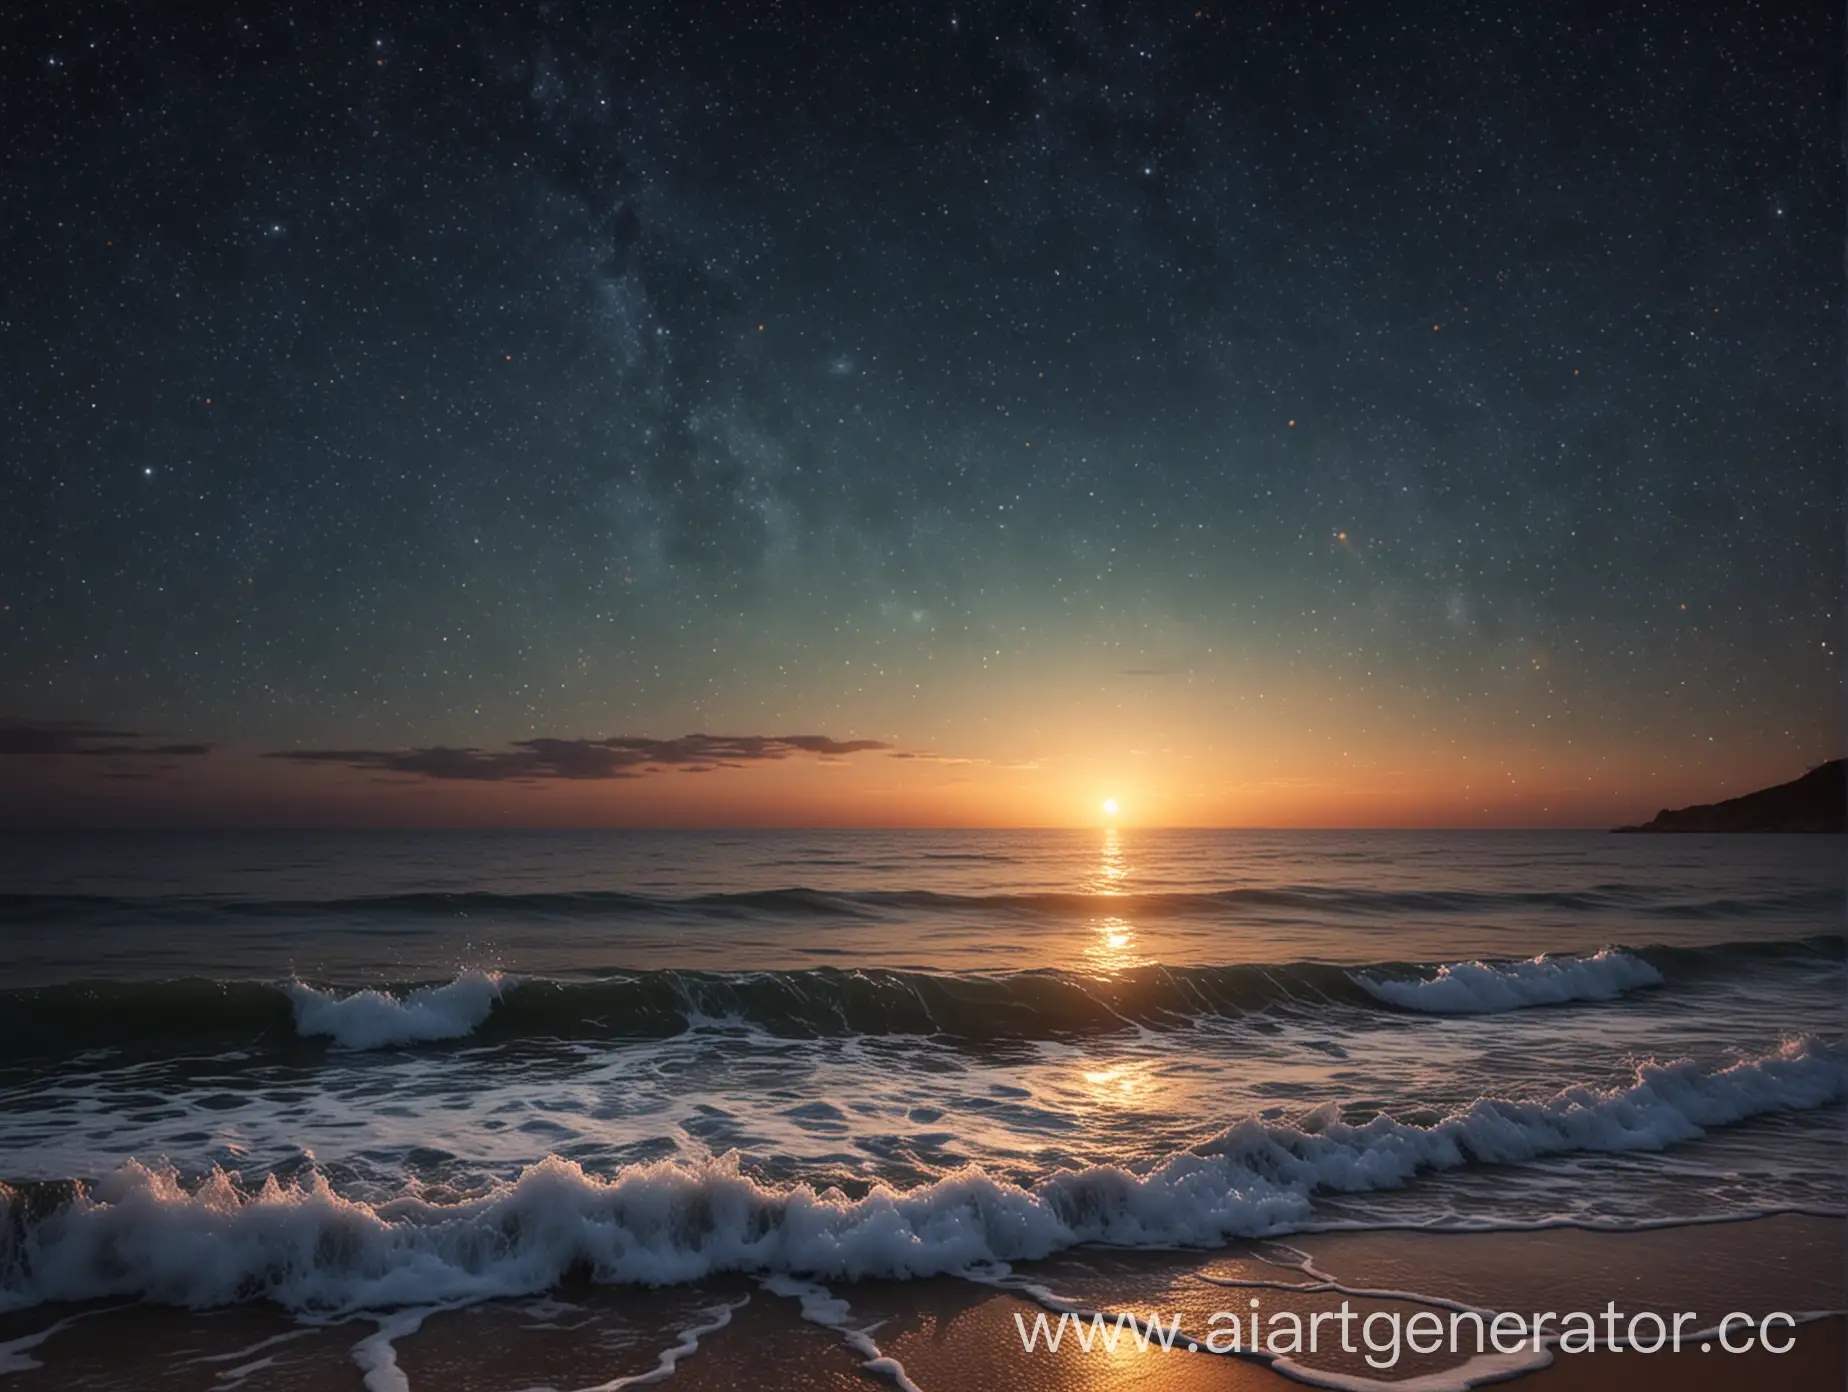 Realistic-Photo-of-an-Evening-Seascape-with-Stars